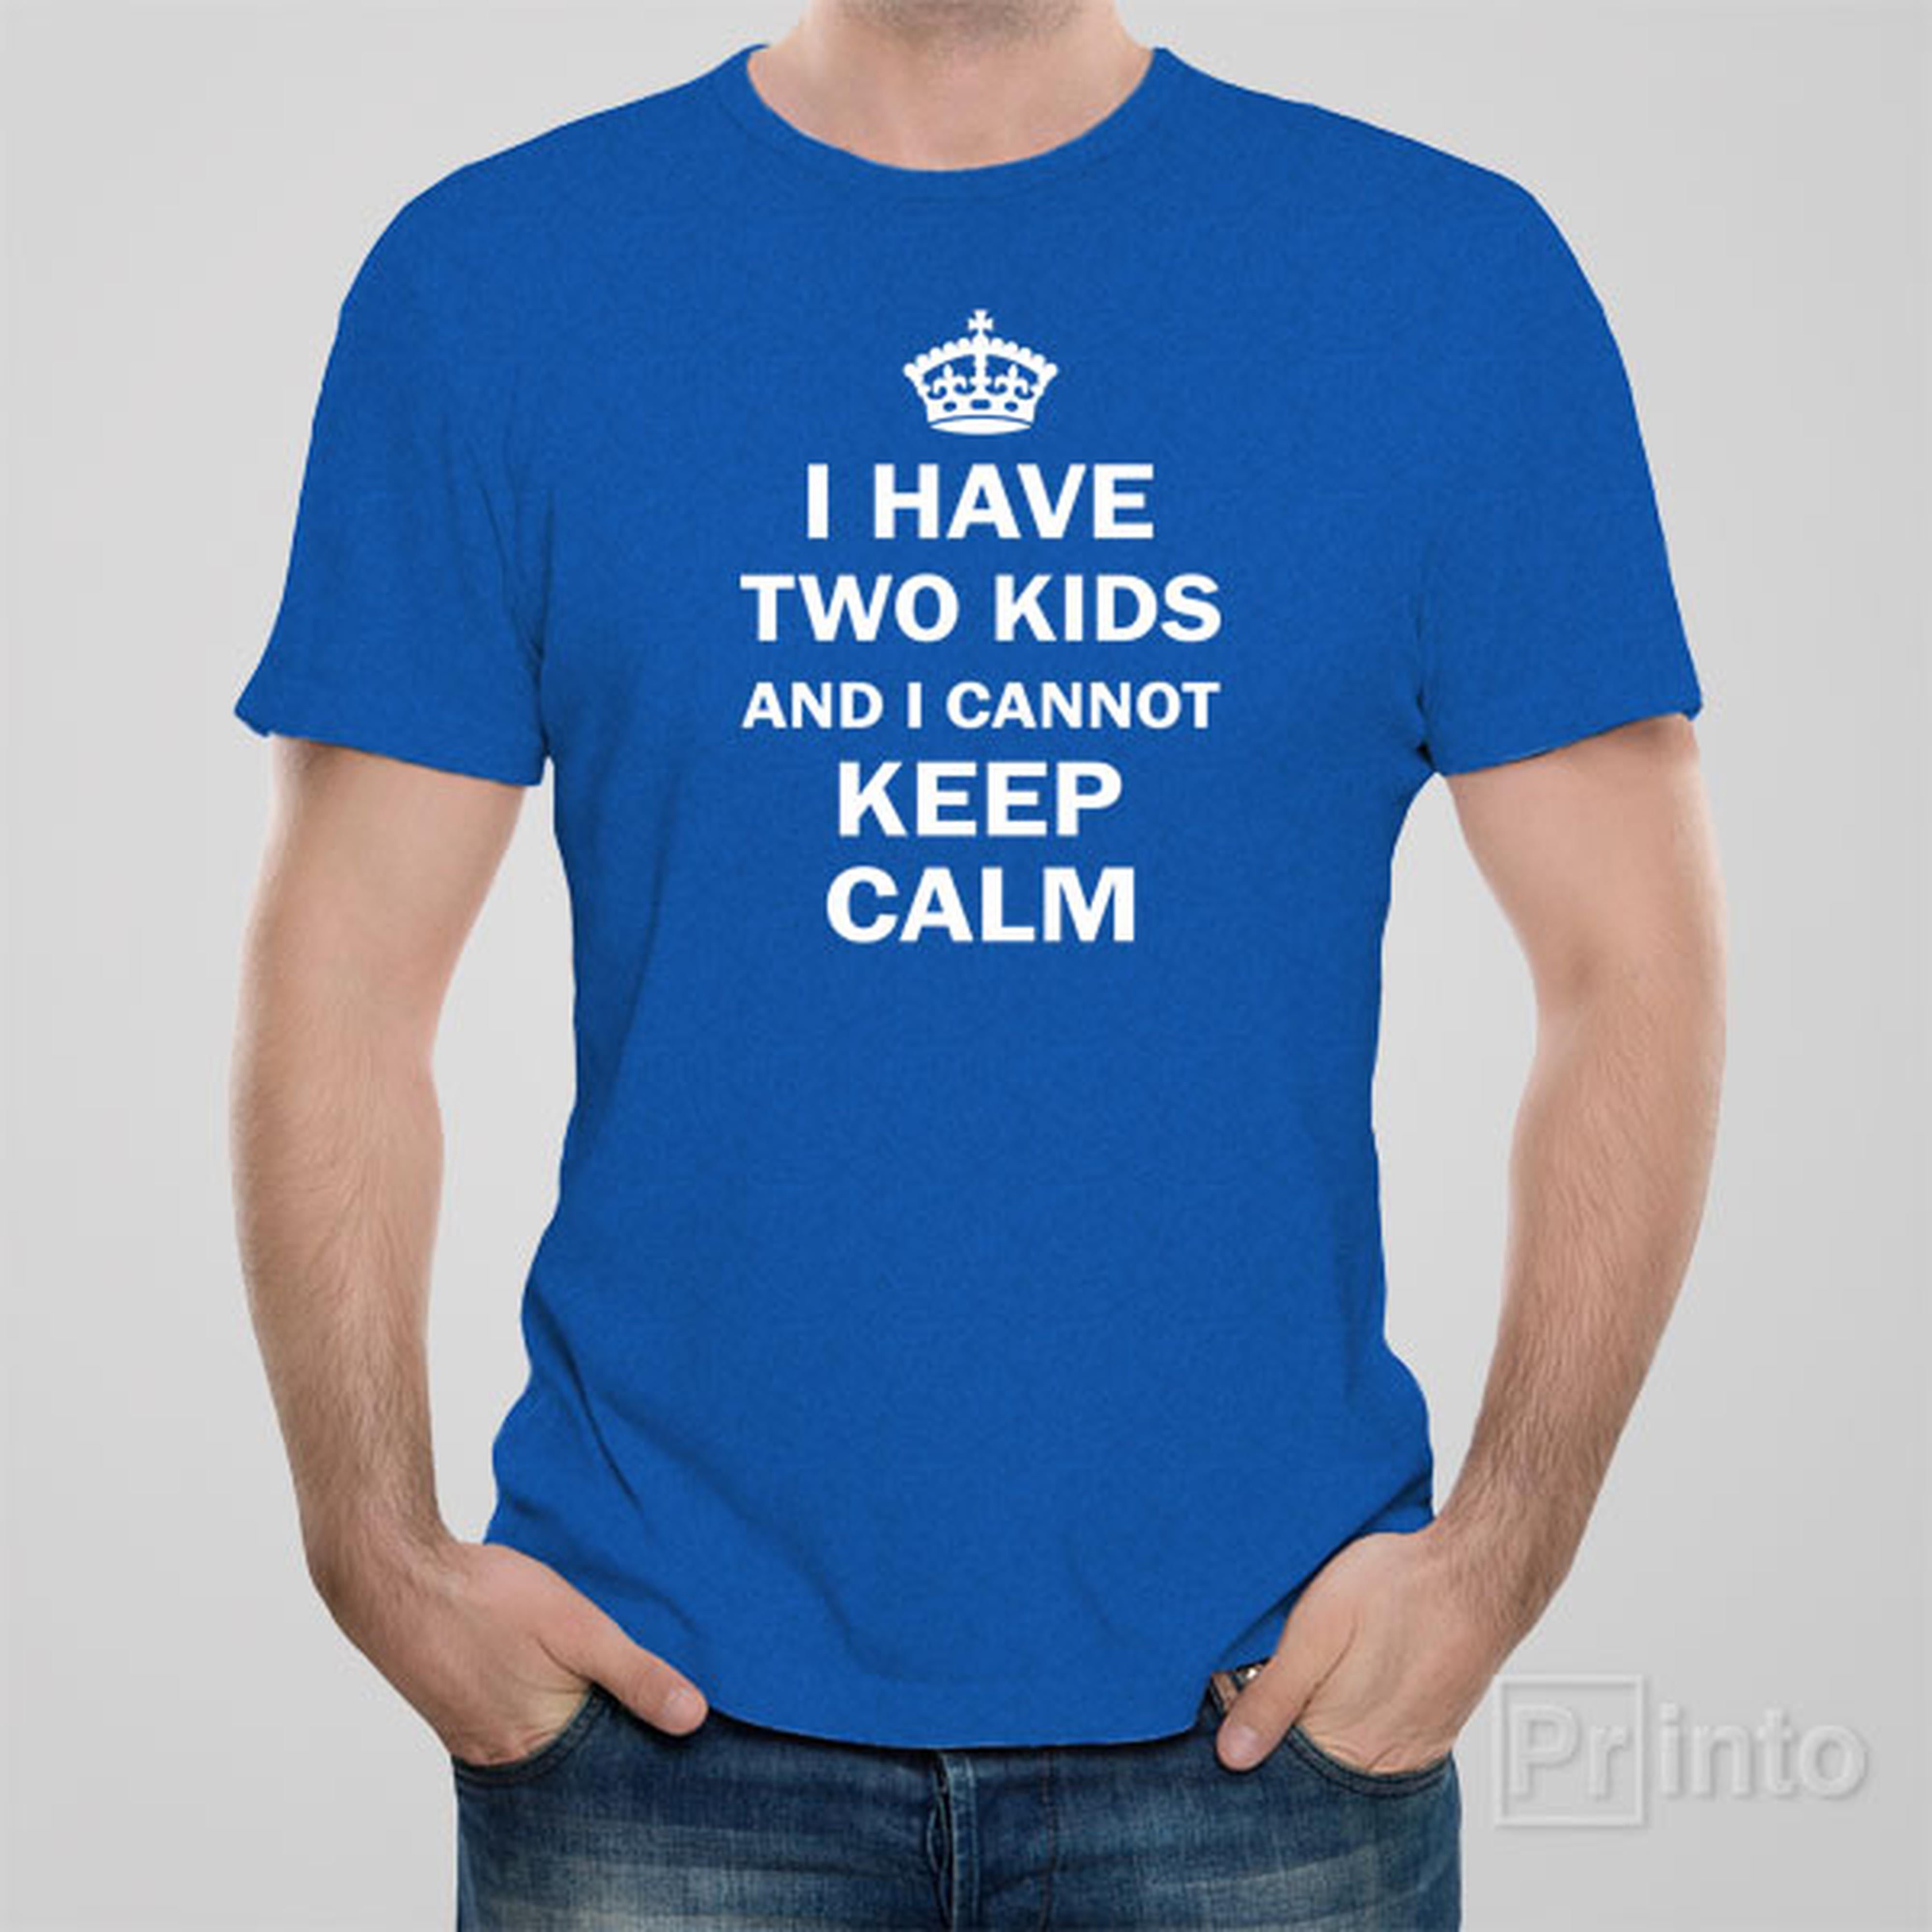 i-have-2-kids-and-i-cannot-keep-calm-t-shirt